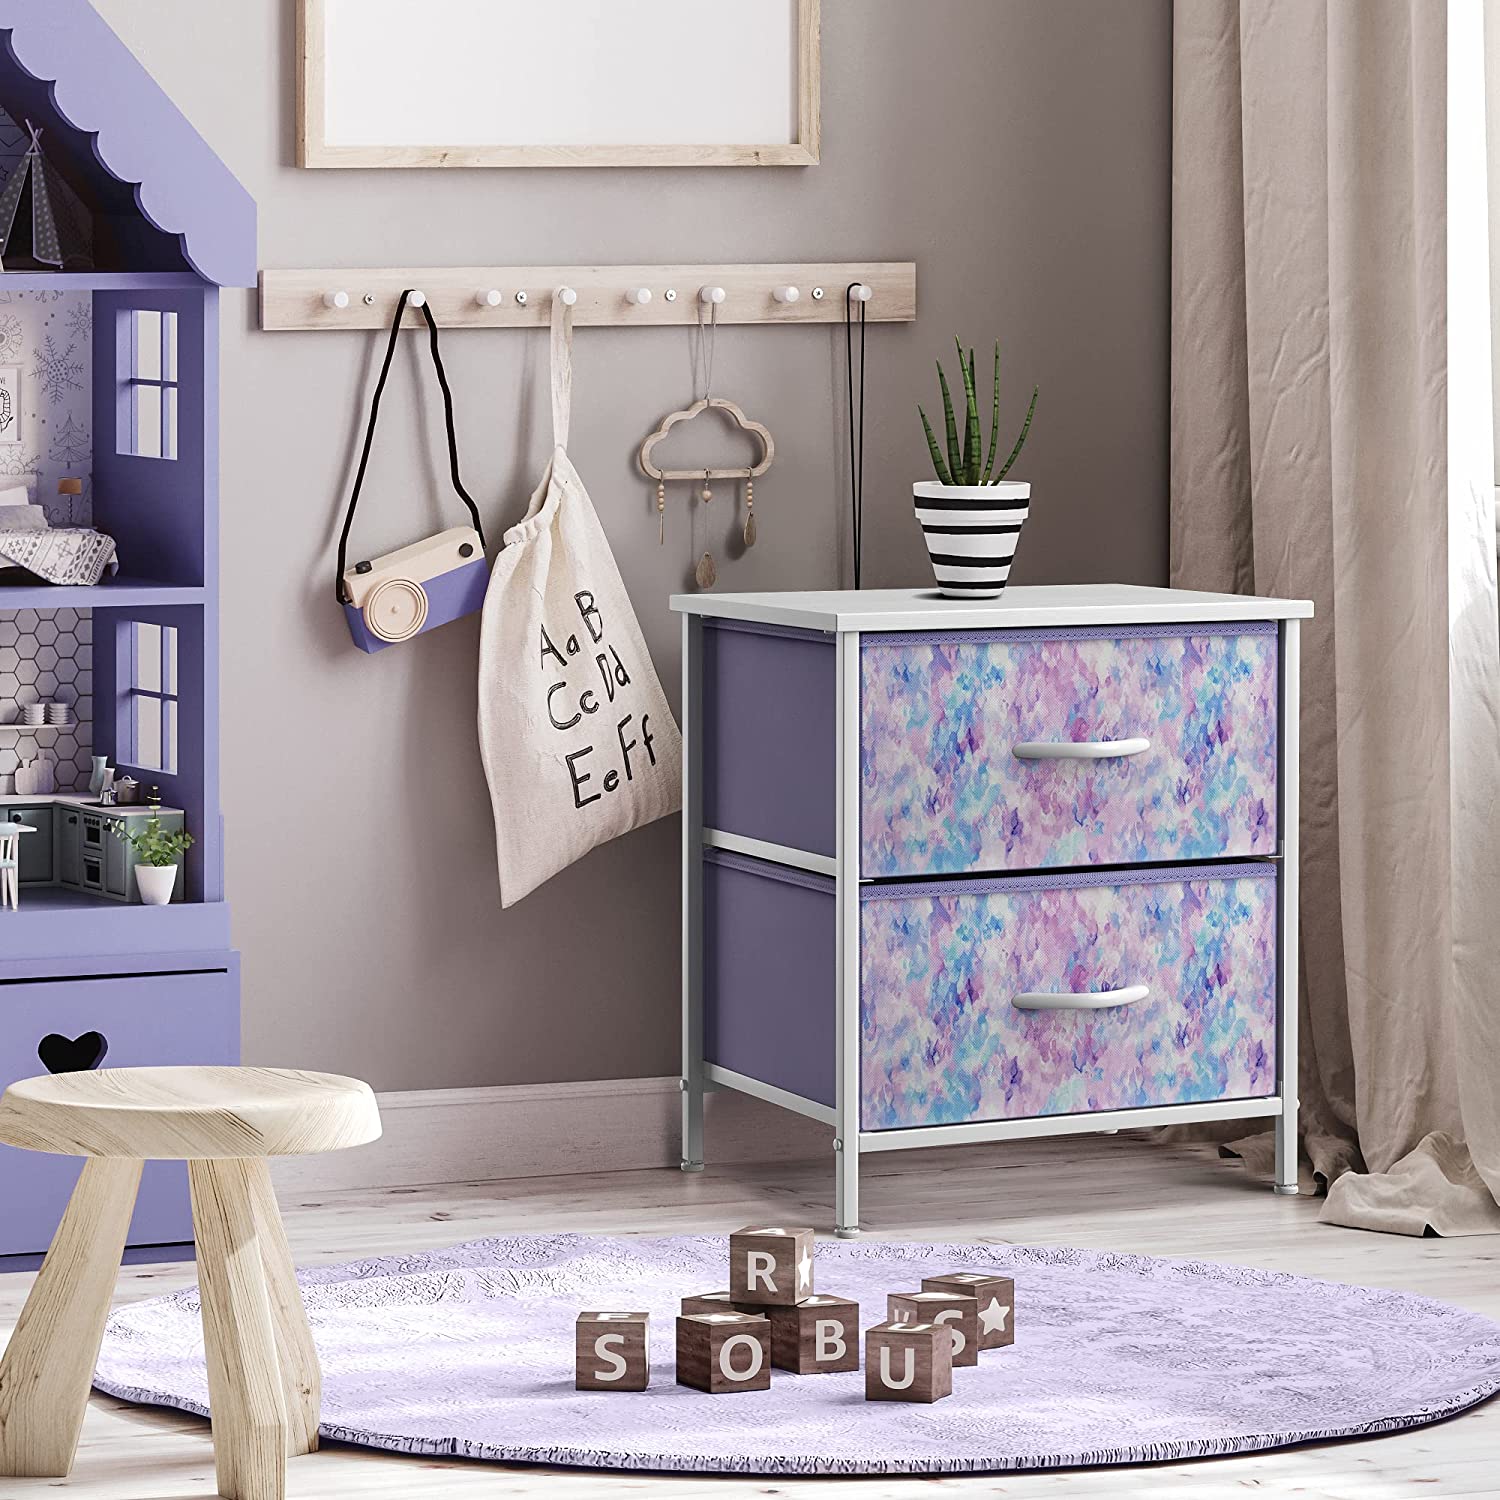 Sorbus Nightstand with Drawers Bedside Furniture  Accent End Table  Chest for Home, Bedroom, Office, College Dorm, Steel Frame, Wood Top, Easy  Pull Fabric Bins (2-Drawer, Blue/Pink/Purple